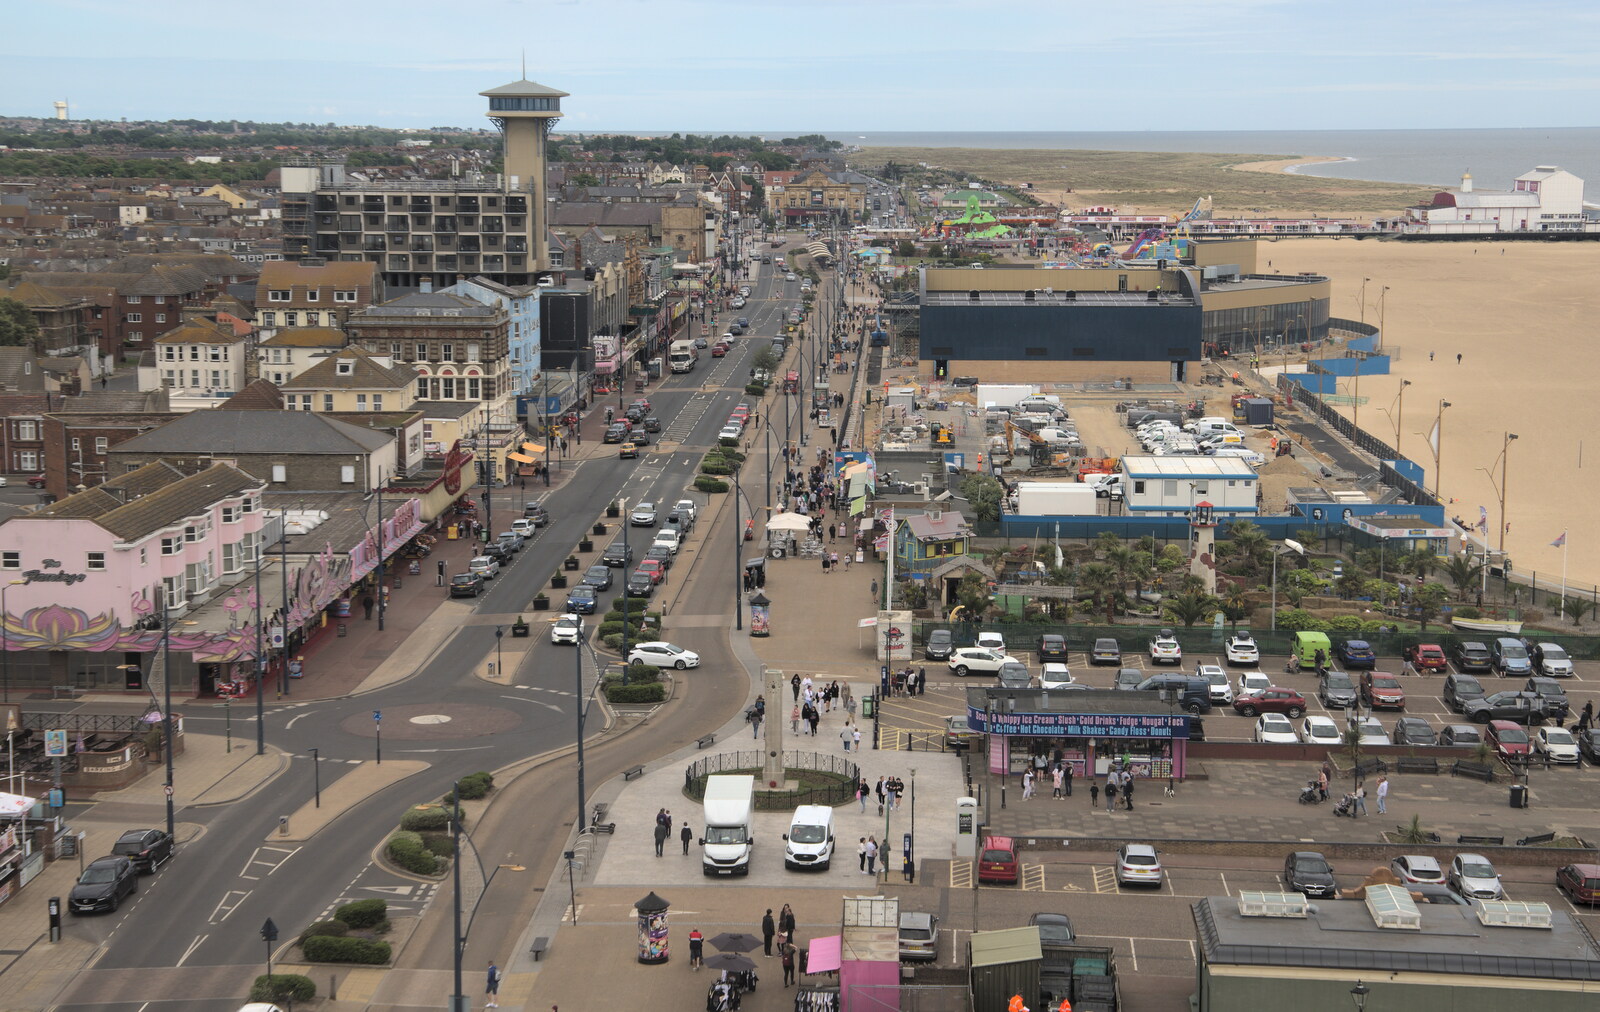 Looking up 'the strip' from the air from Faded Seaside Glamour: A Weekend in Great Yarmouth, Norfolk - 29th May 2022